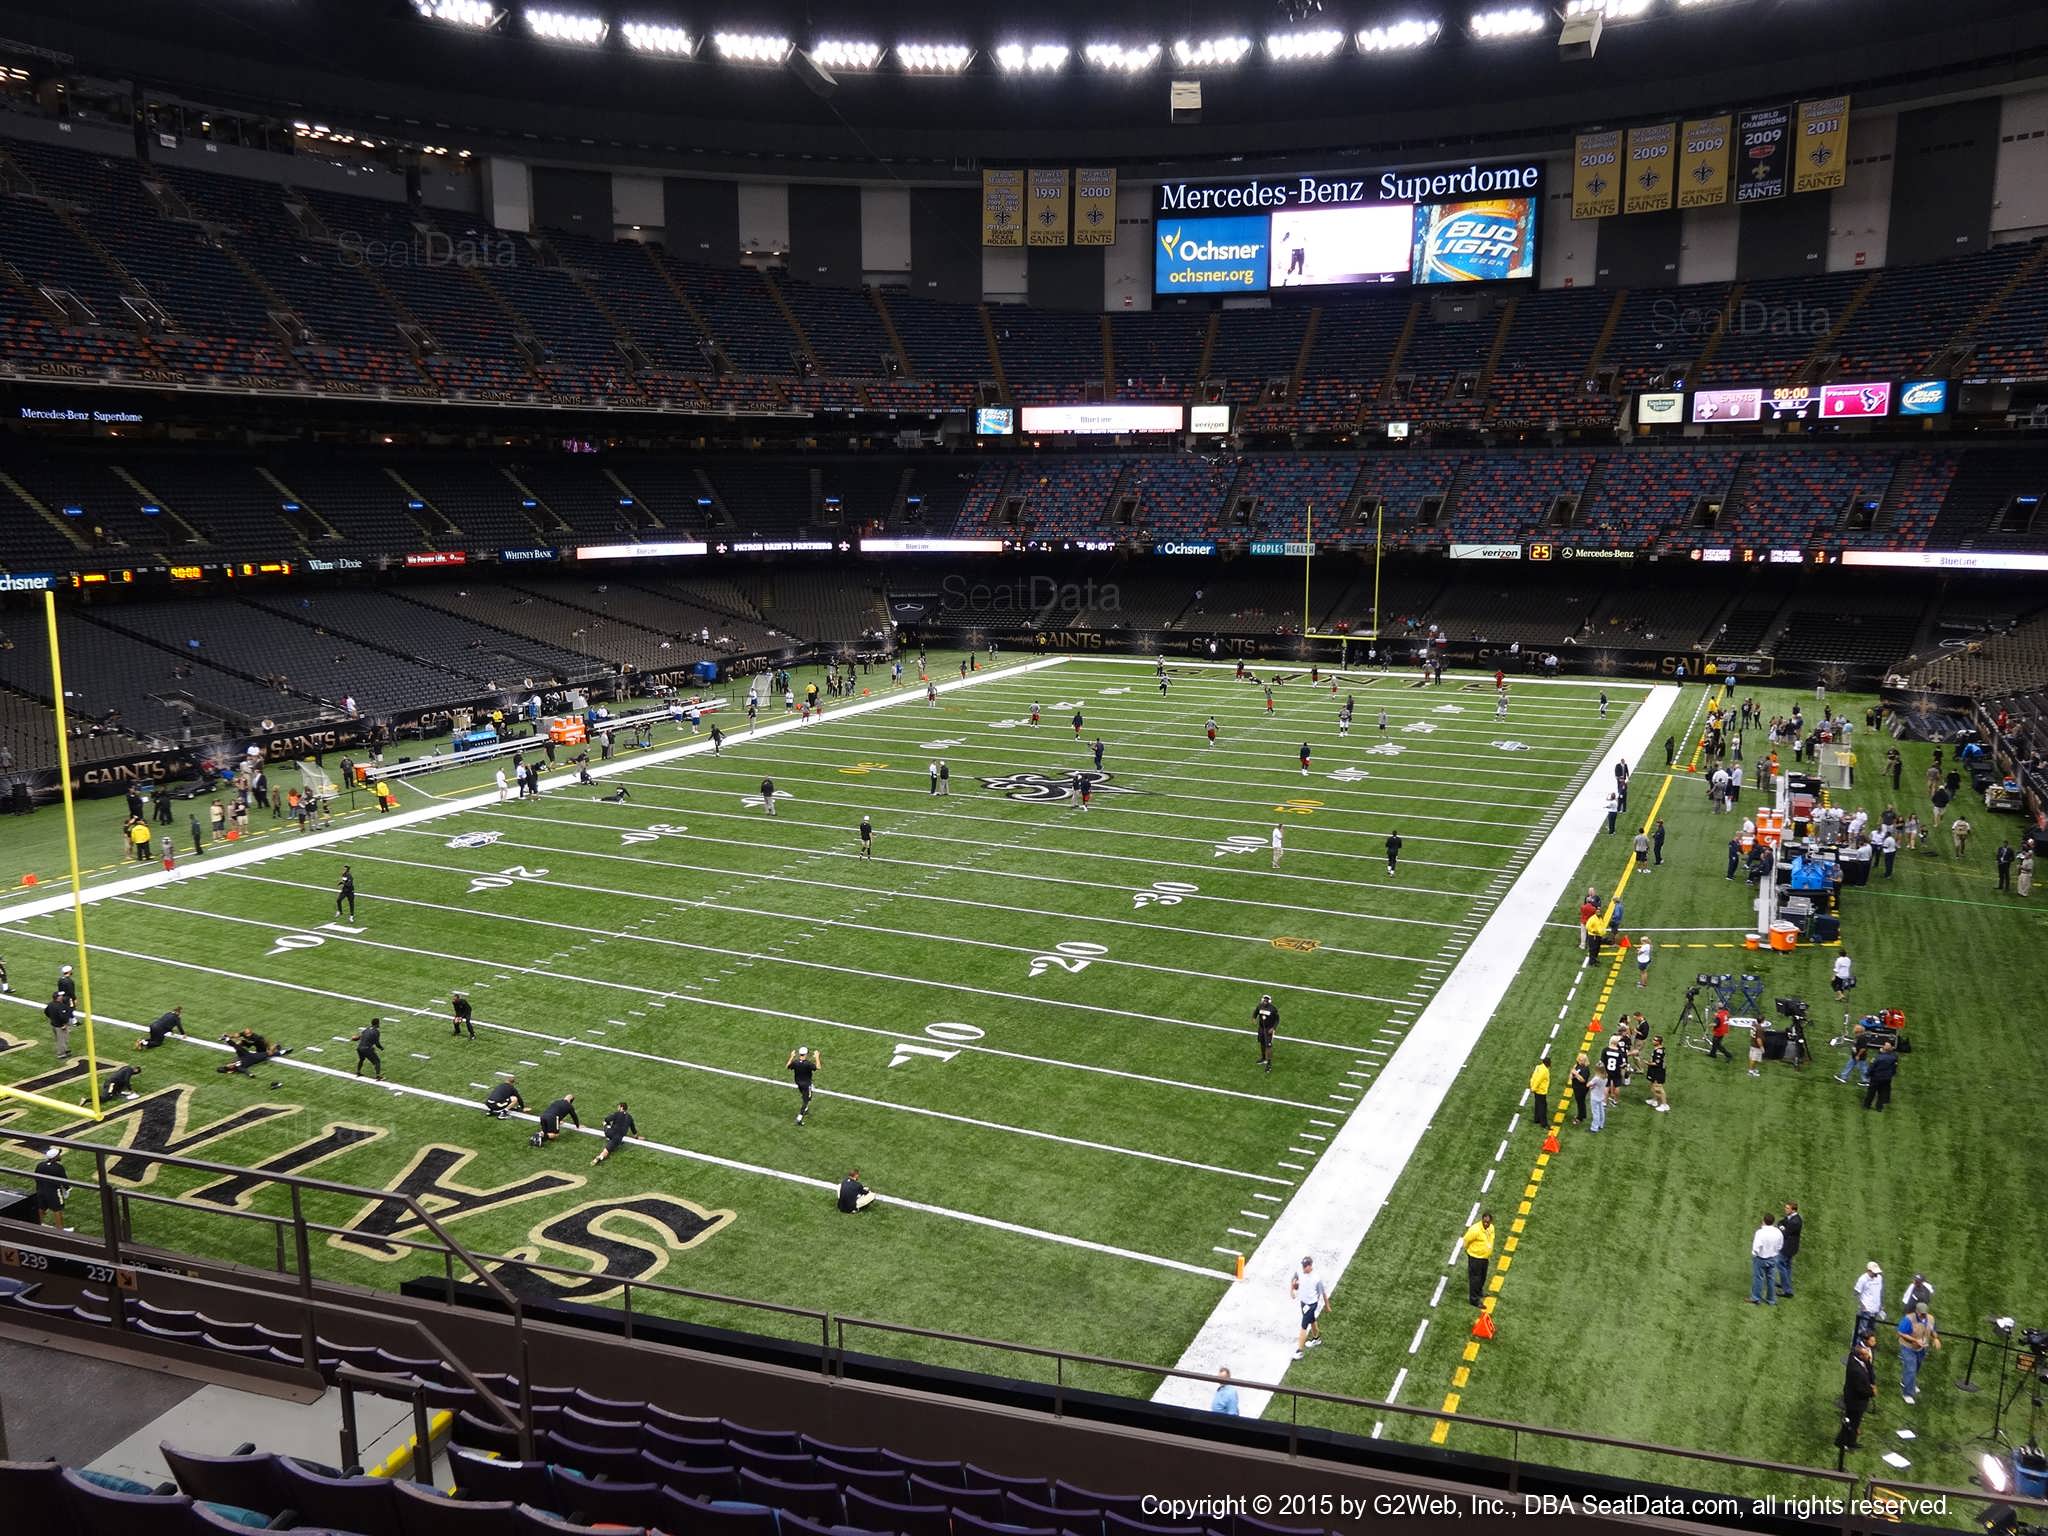 Seat view from section 321 at the Mercedes-Benz Superdome, home of the New Orleans Saints